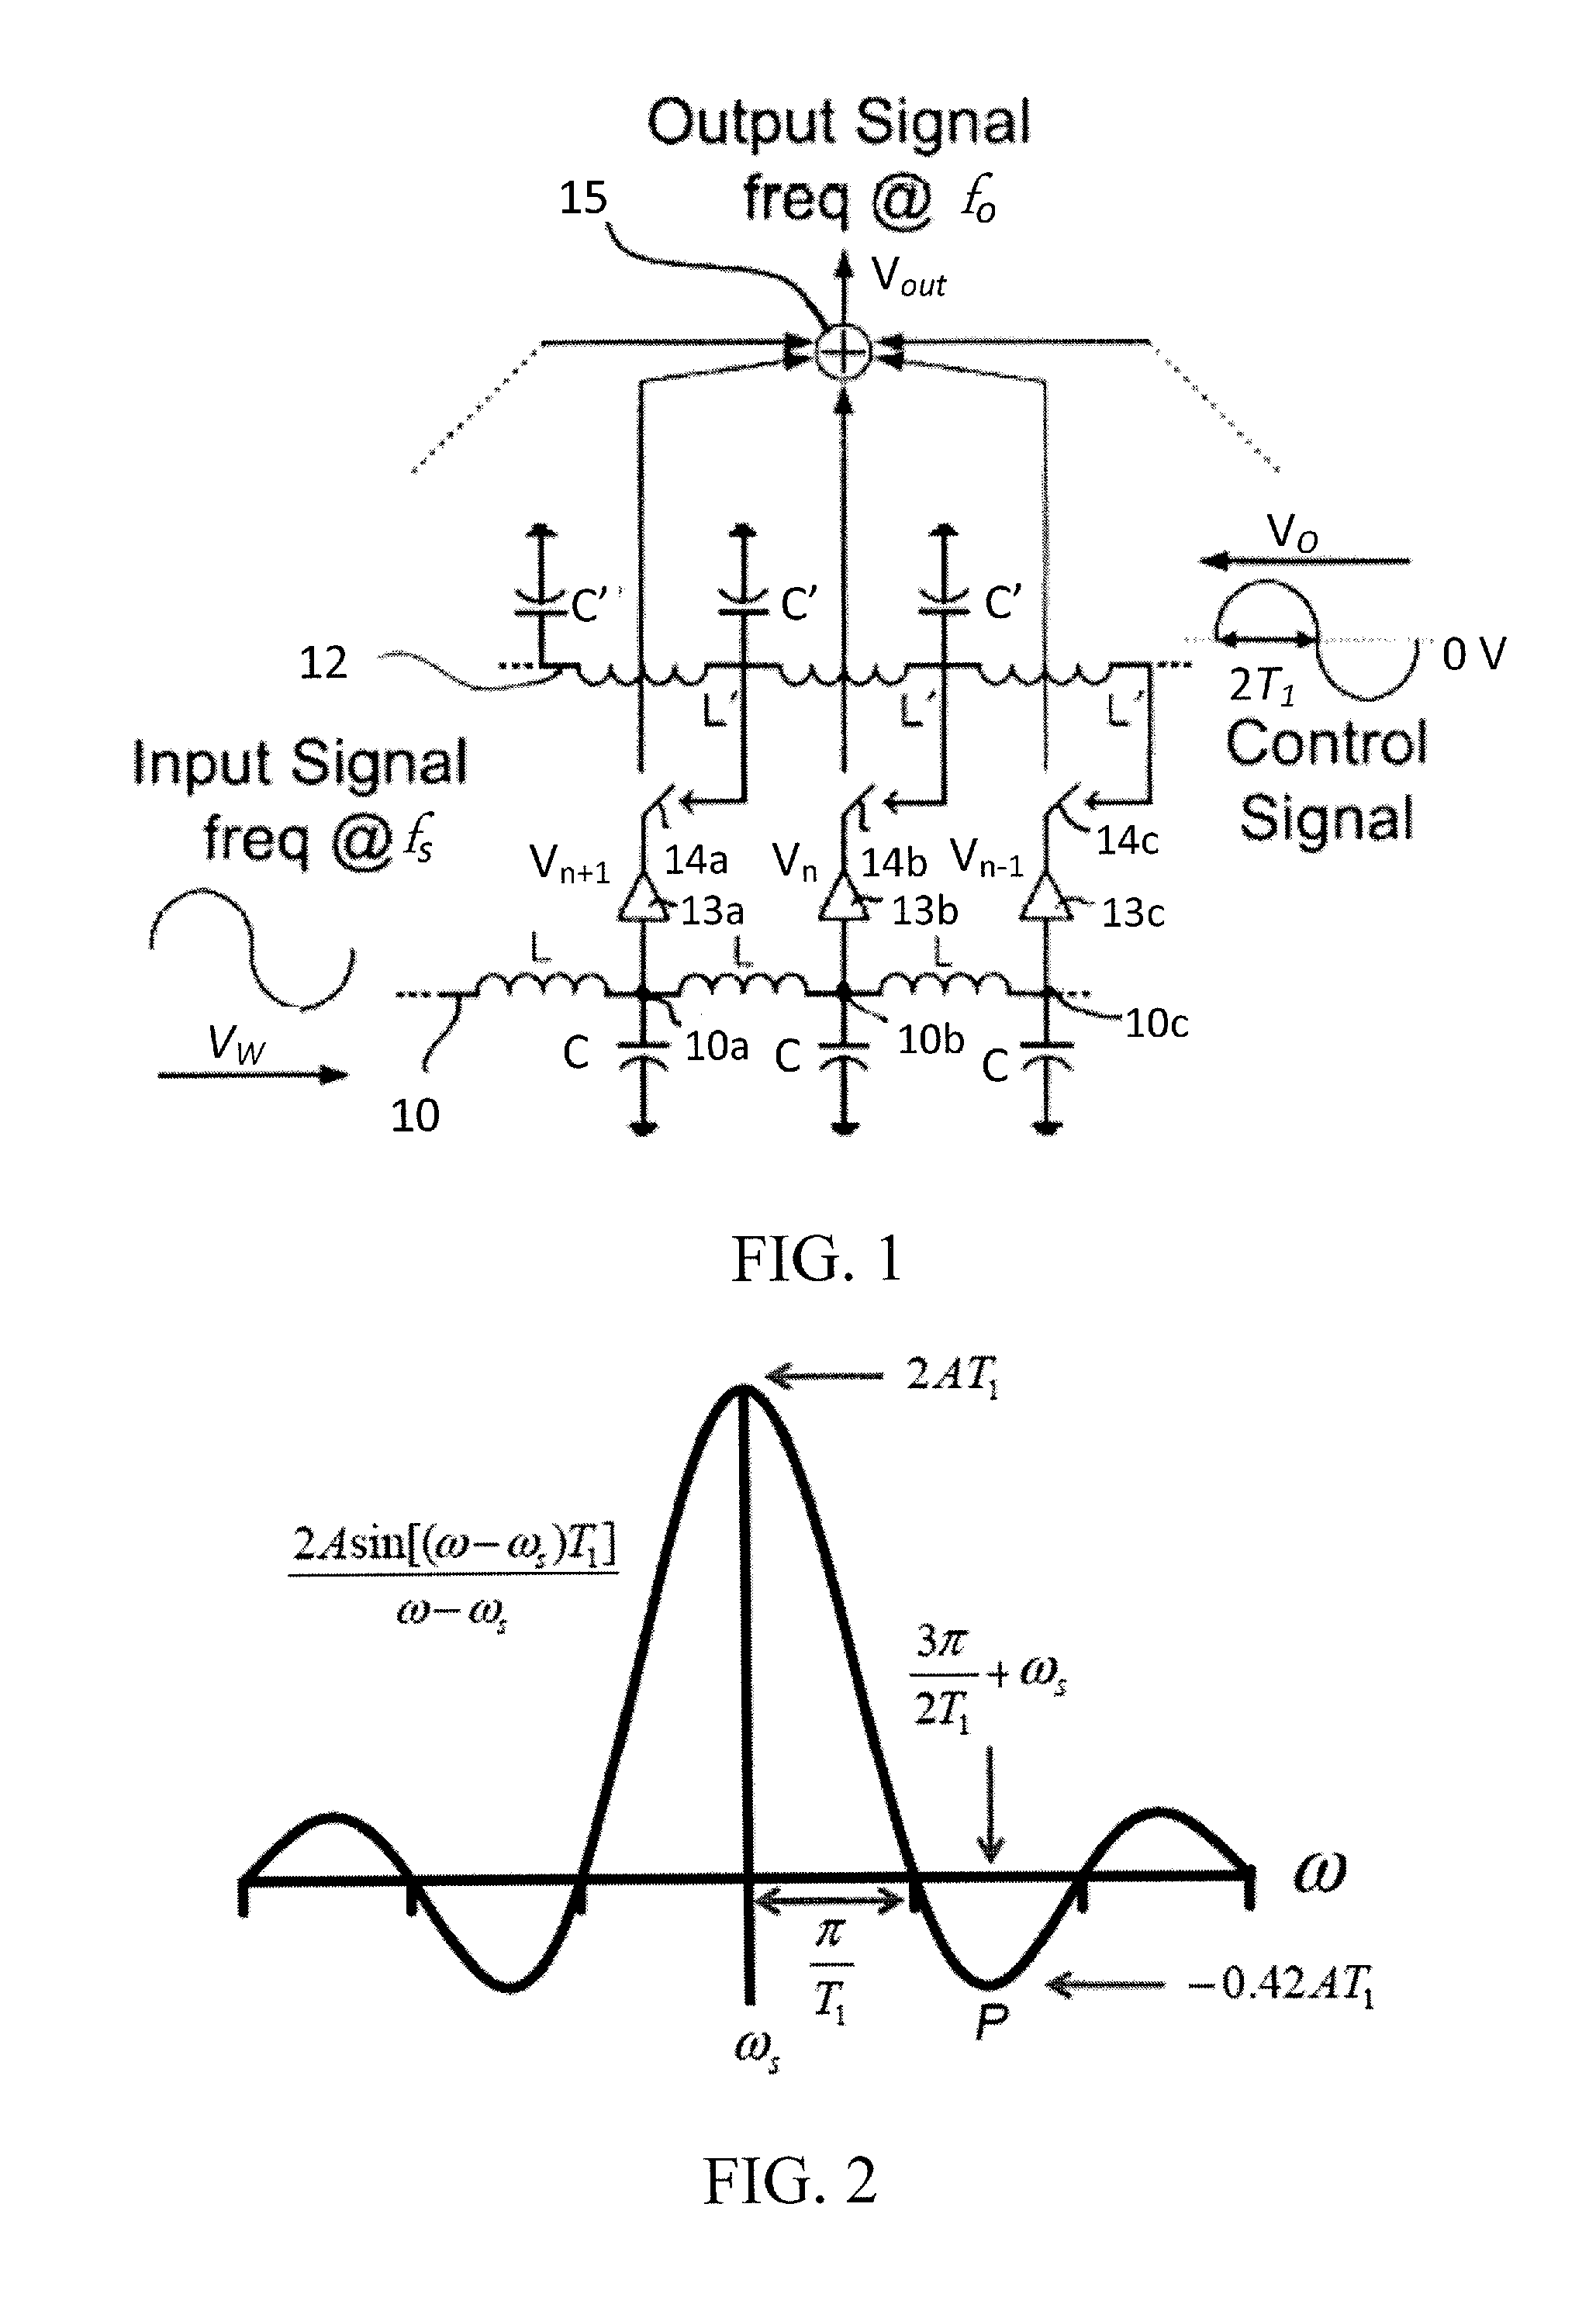 Doppler-inspired, high-frequency signal generation and up-conversion